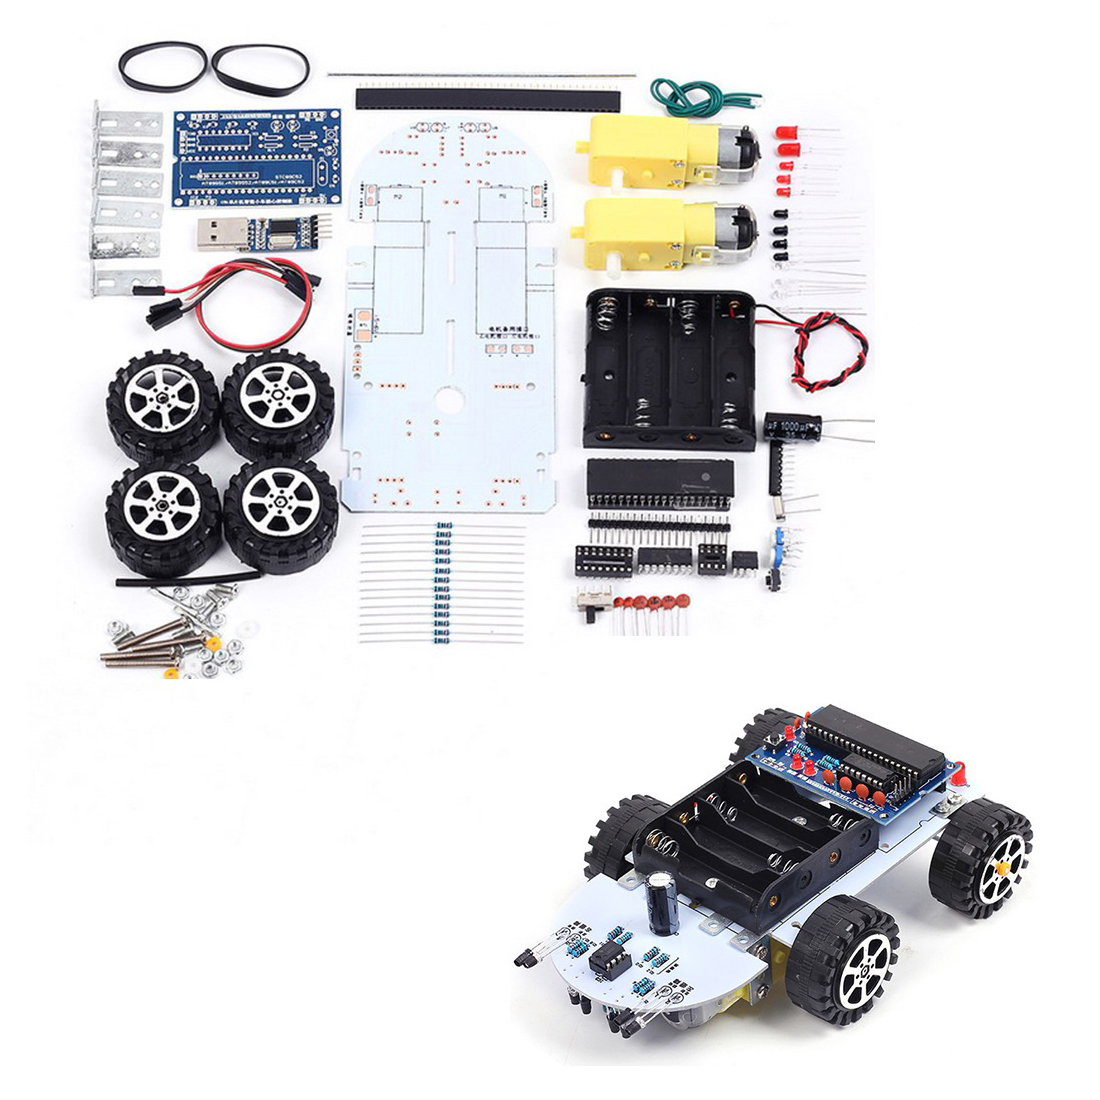 

C51 DC 6V Intelligent Tracking Obstacle Car DIY Kit with Two Single Axis Gear Motor Drives